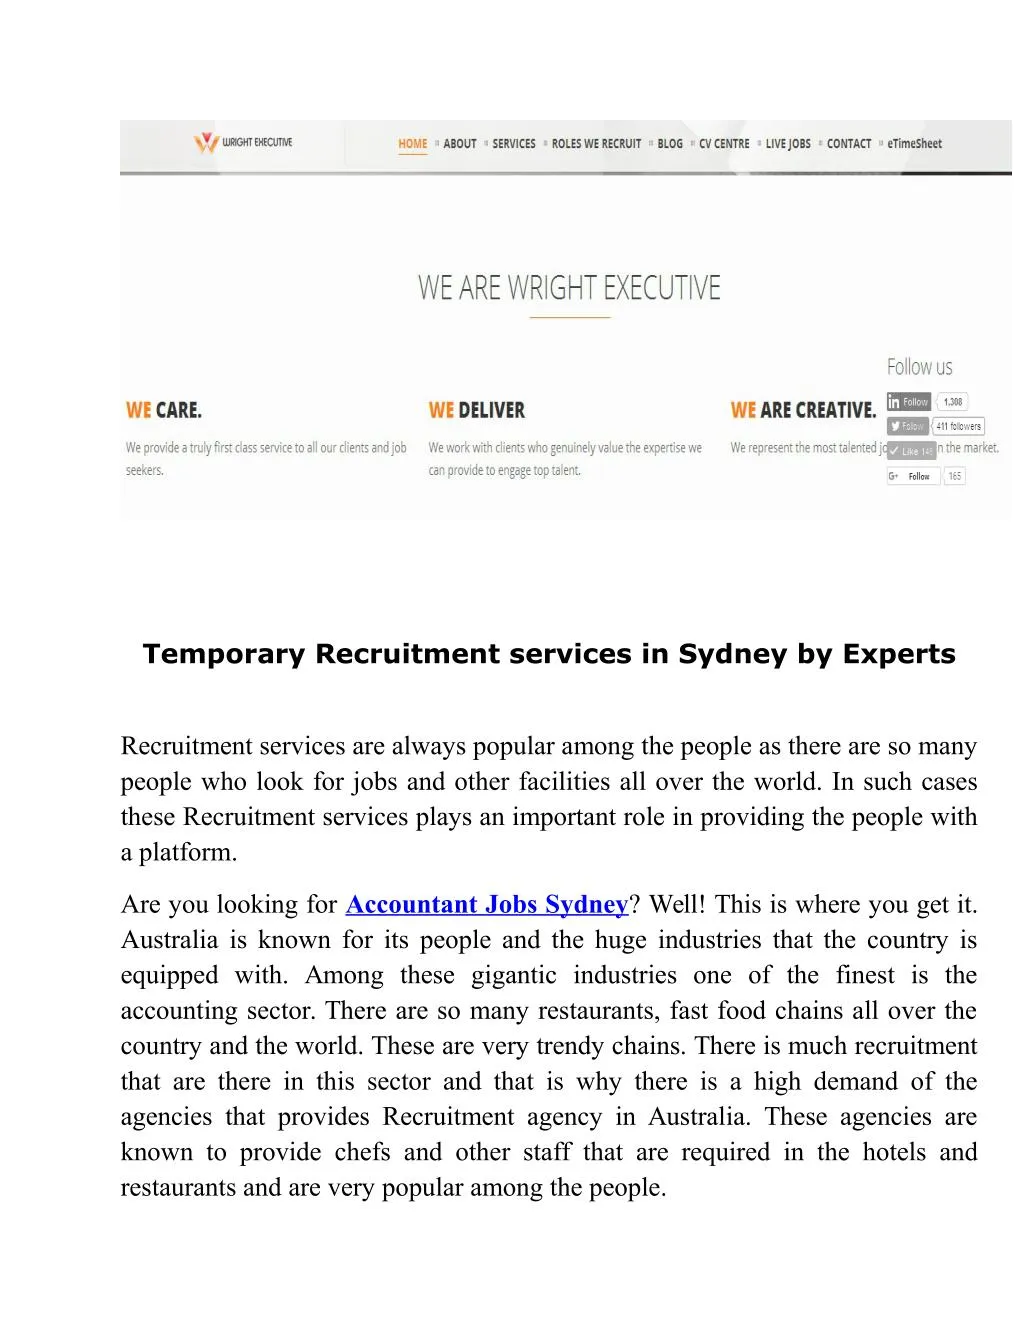 temporary recruitment services in sydney